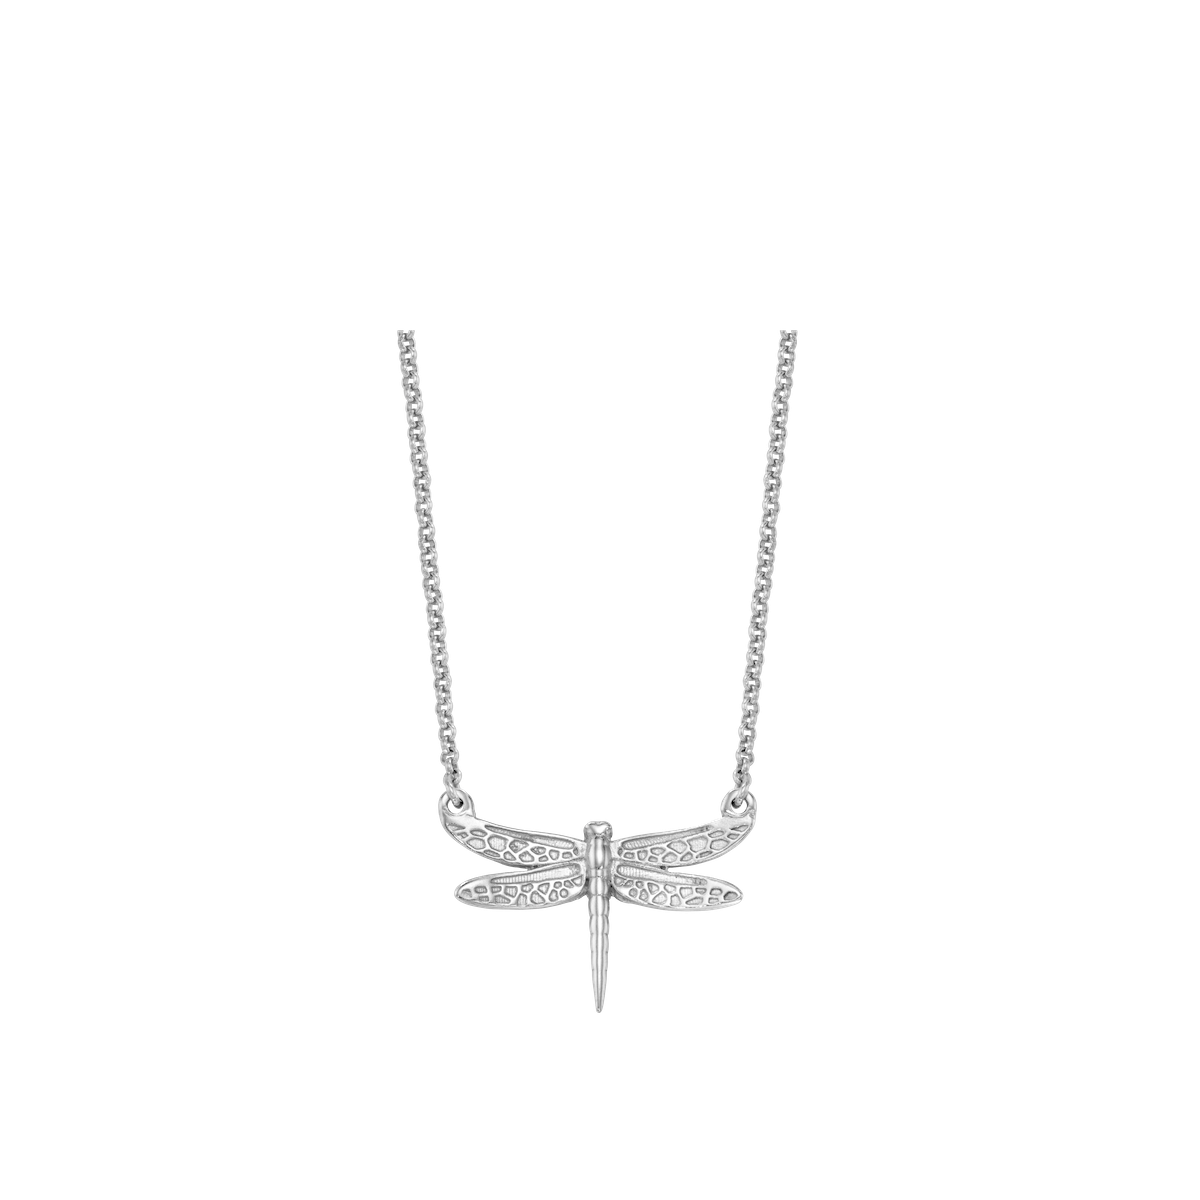 Dragonfly Necklace - Small